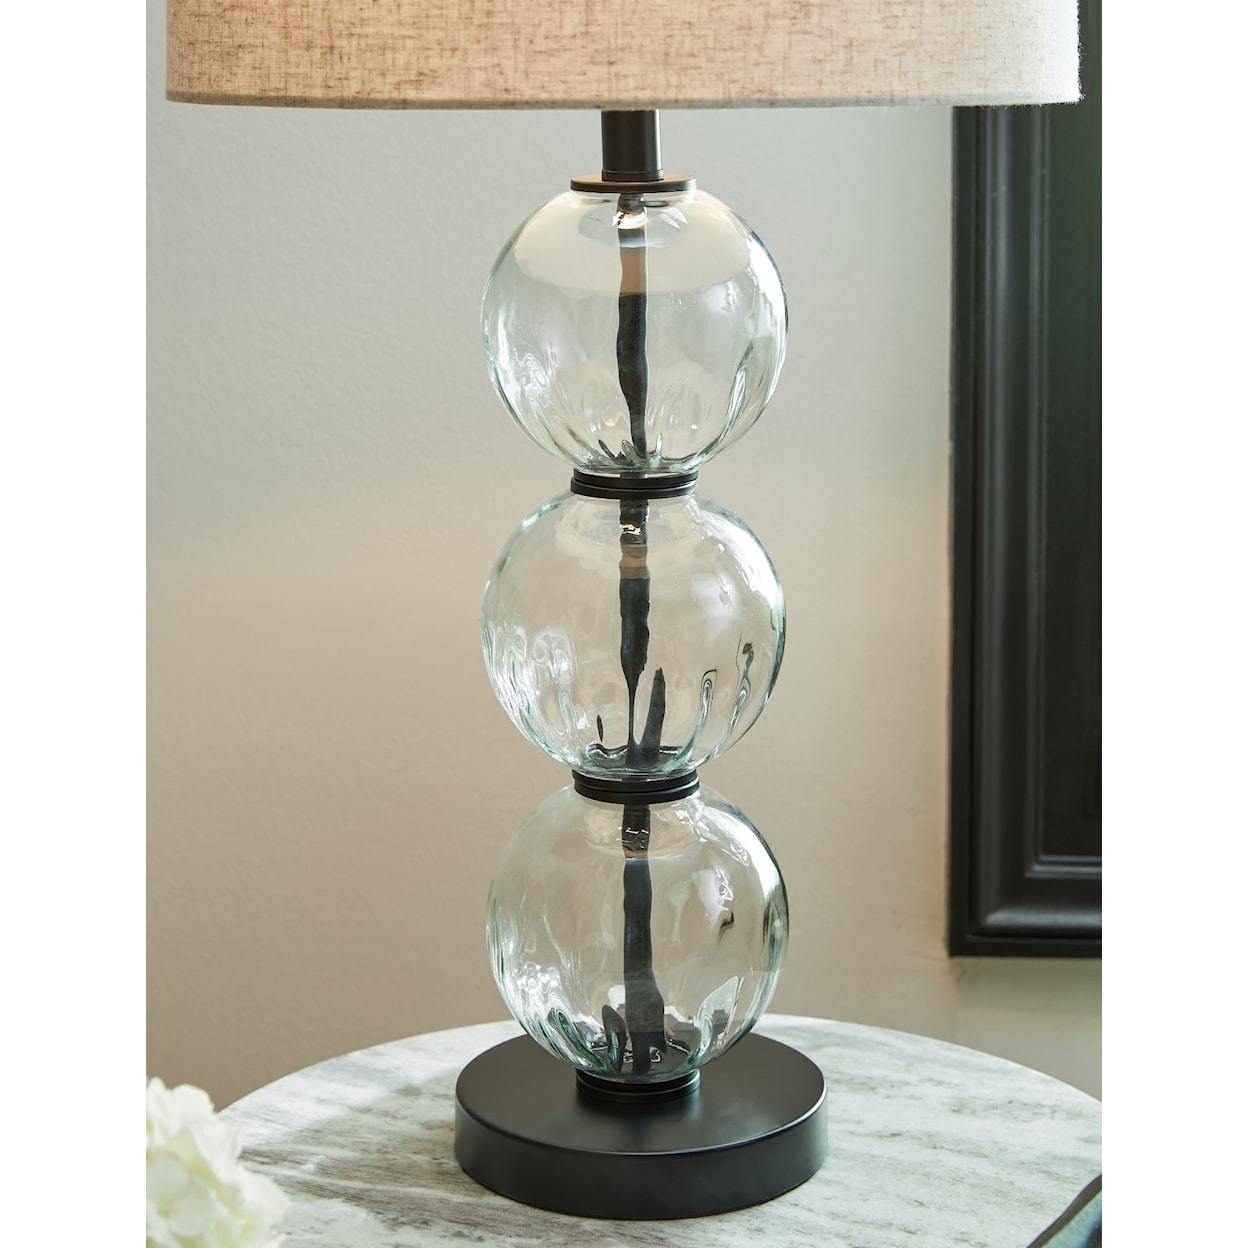 Signature Design by Ashley Airbal Glass Table Lamp (Set of 2)